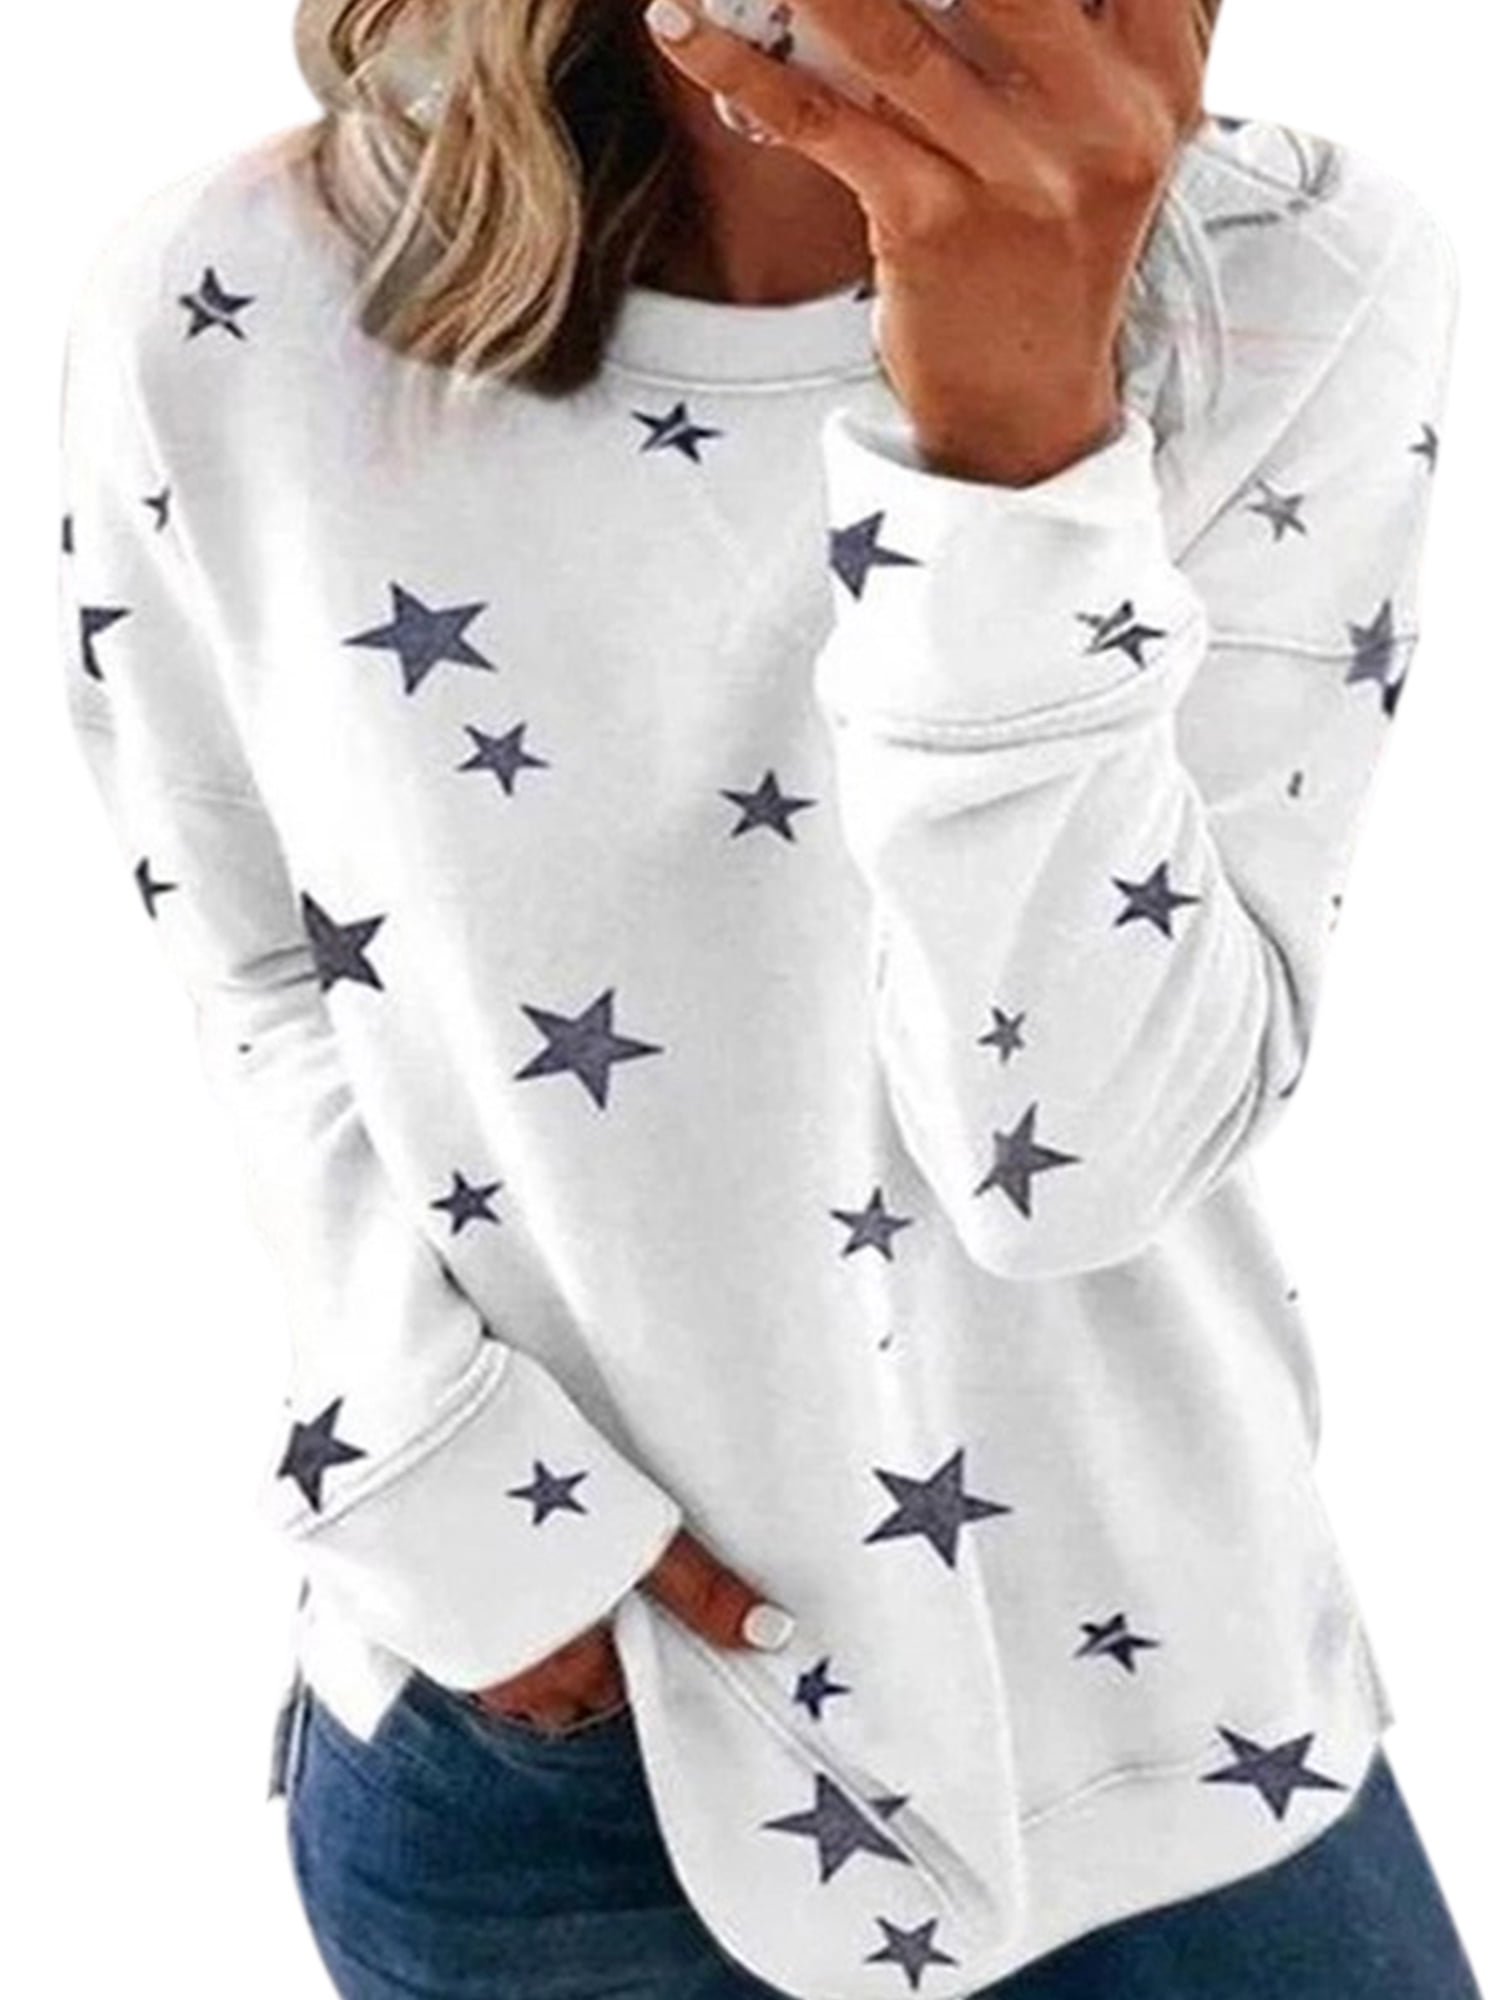 Plus Size Women Long Sleeve T Shirt Tops Ladies Loose Star Printed Casual Blouse